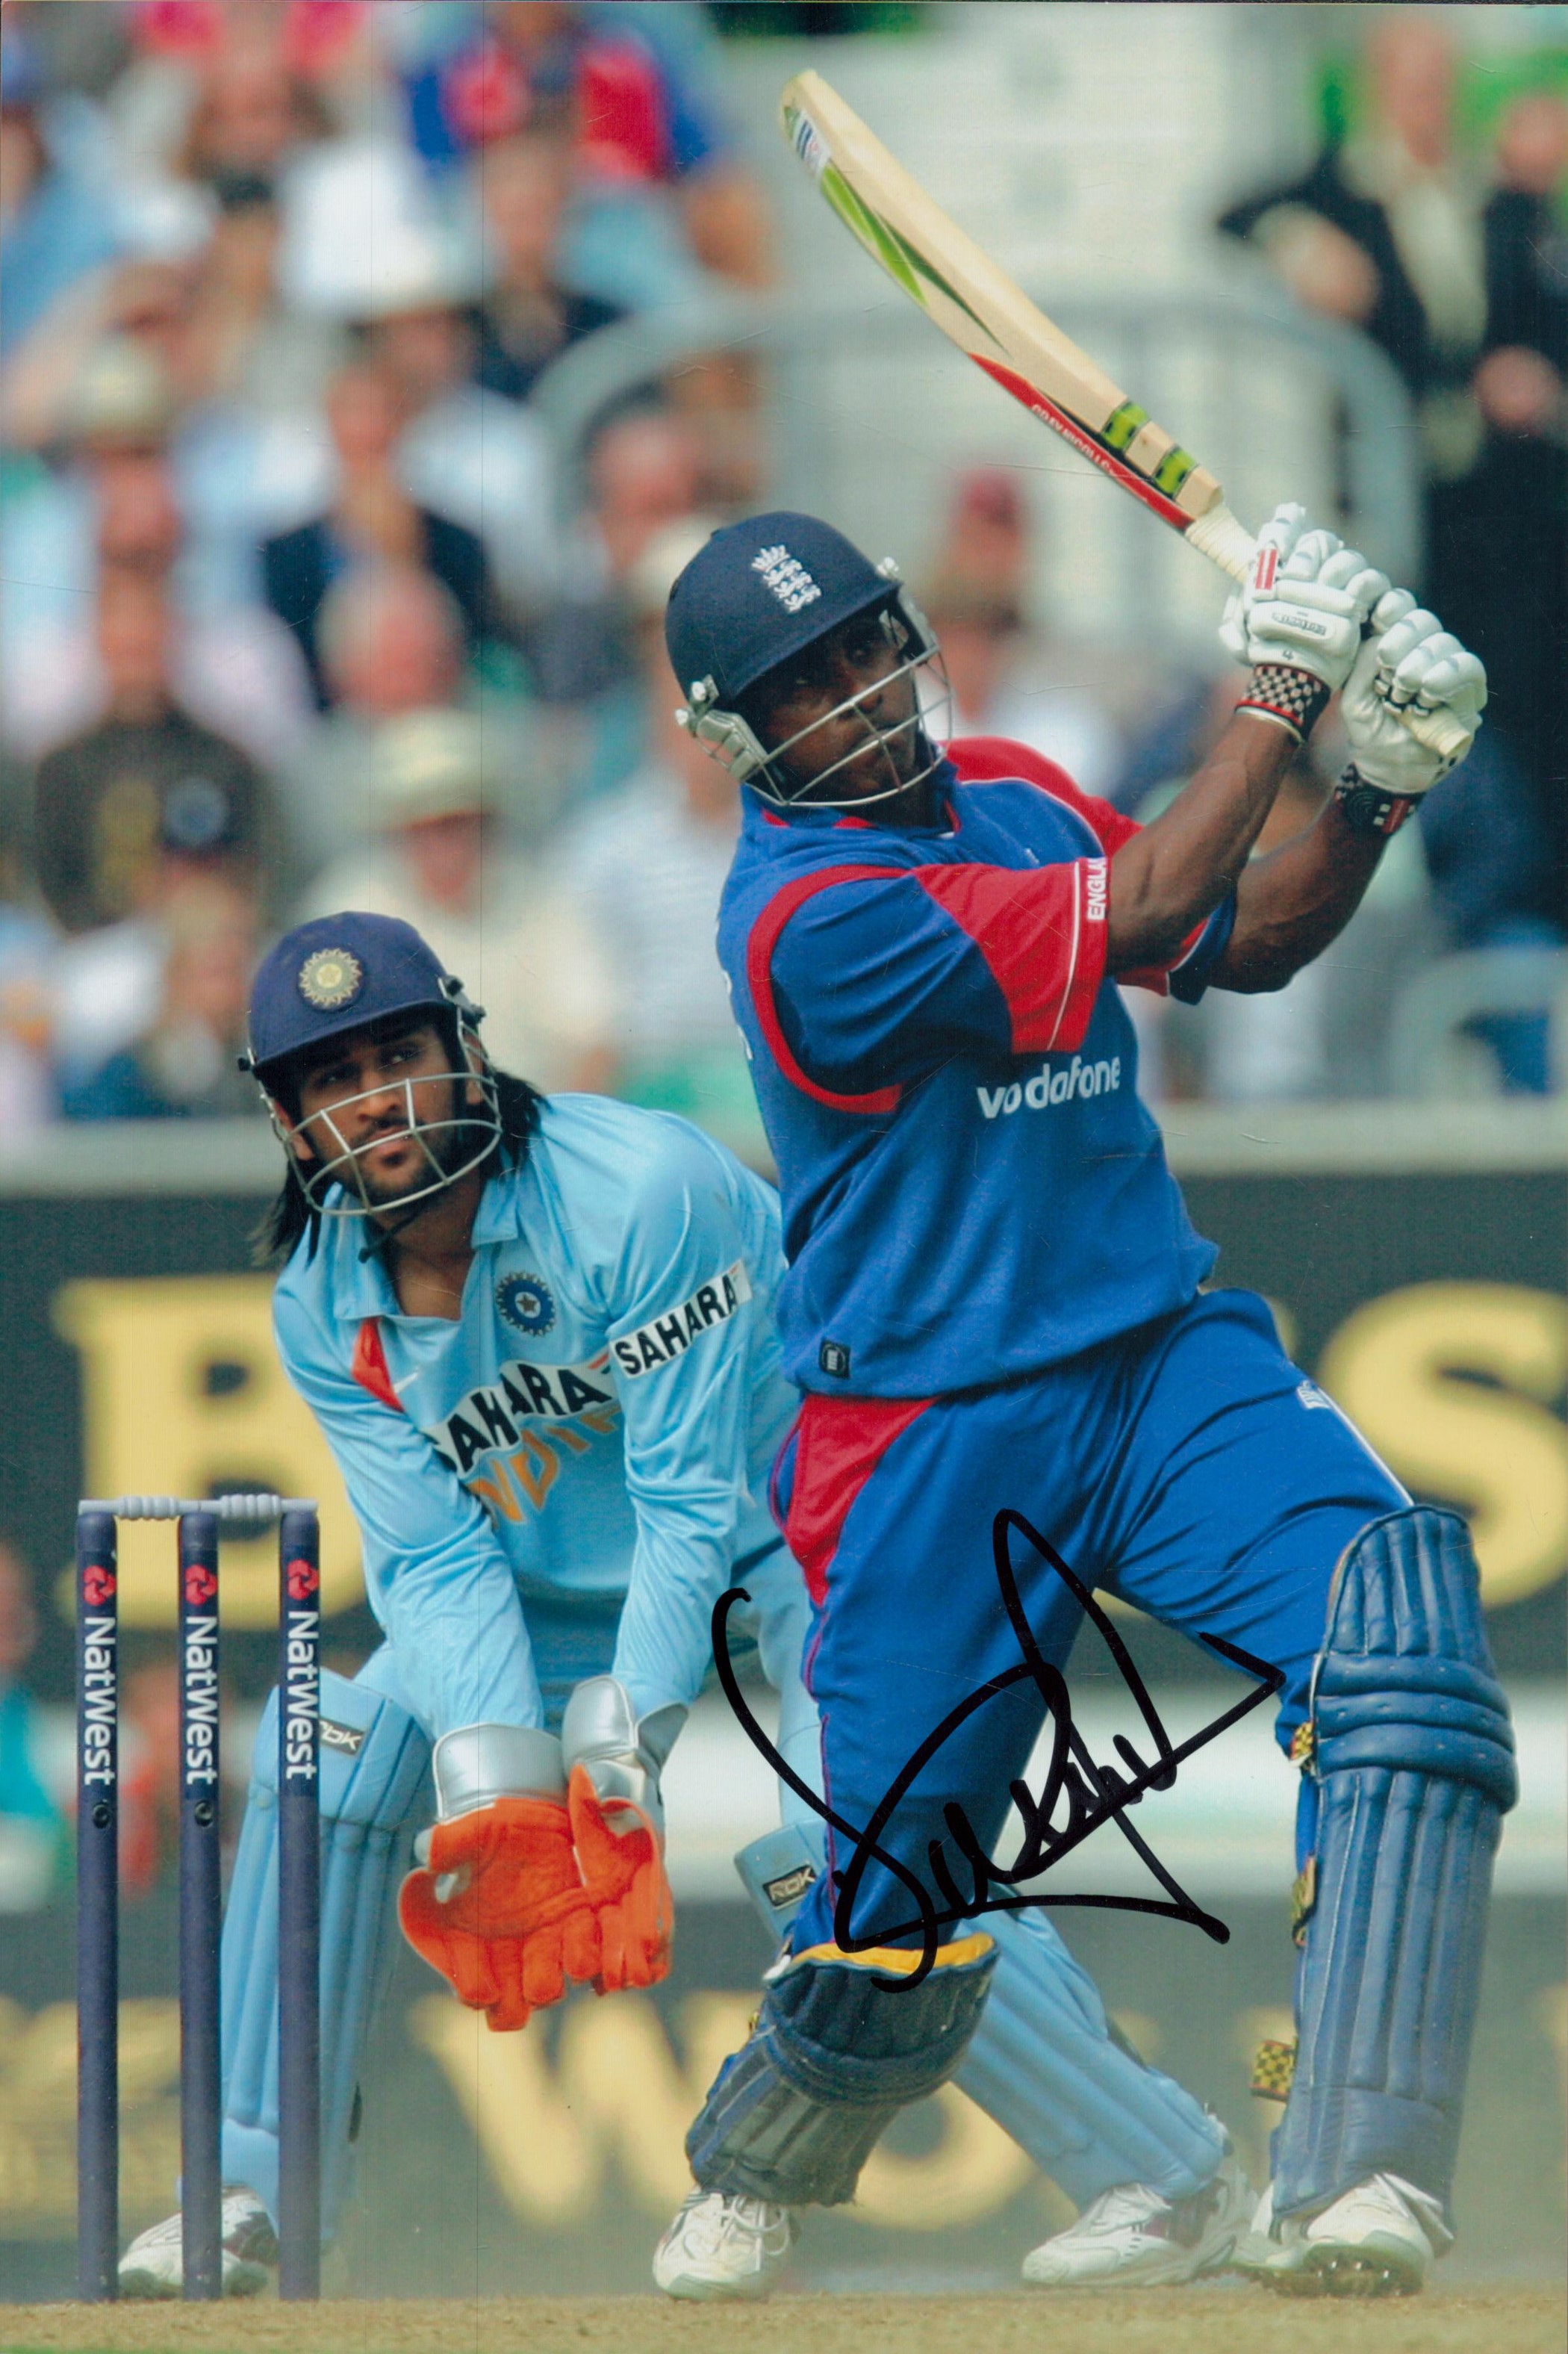 Dimitri Mascarenhas signed 10x8 inch colour photo picture in action for England in One Day